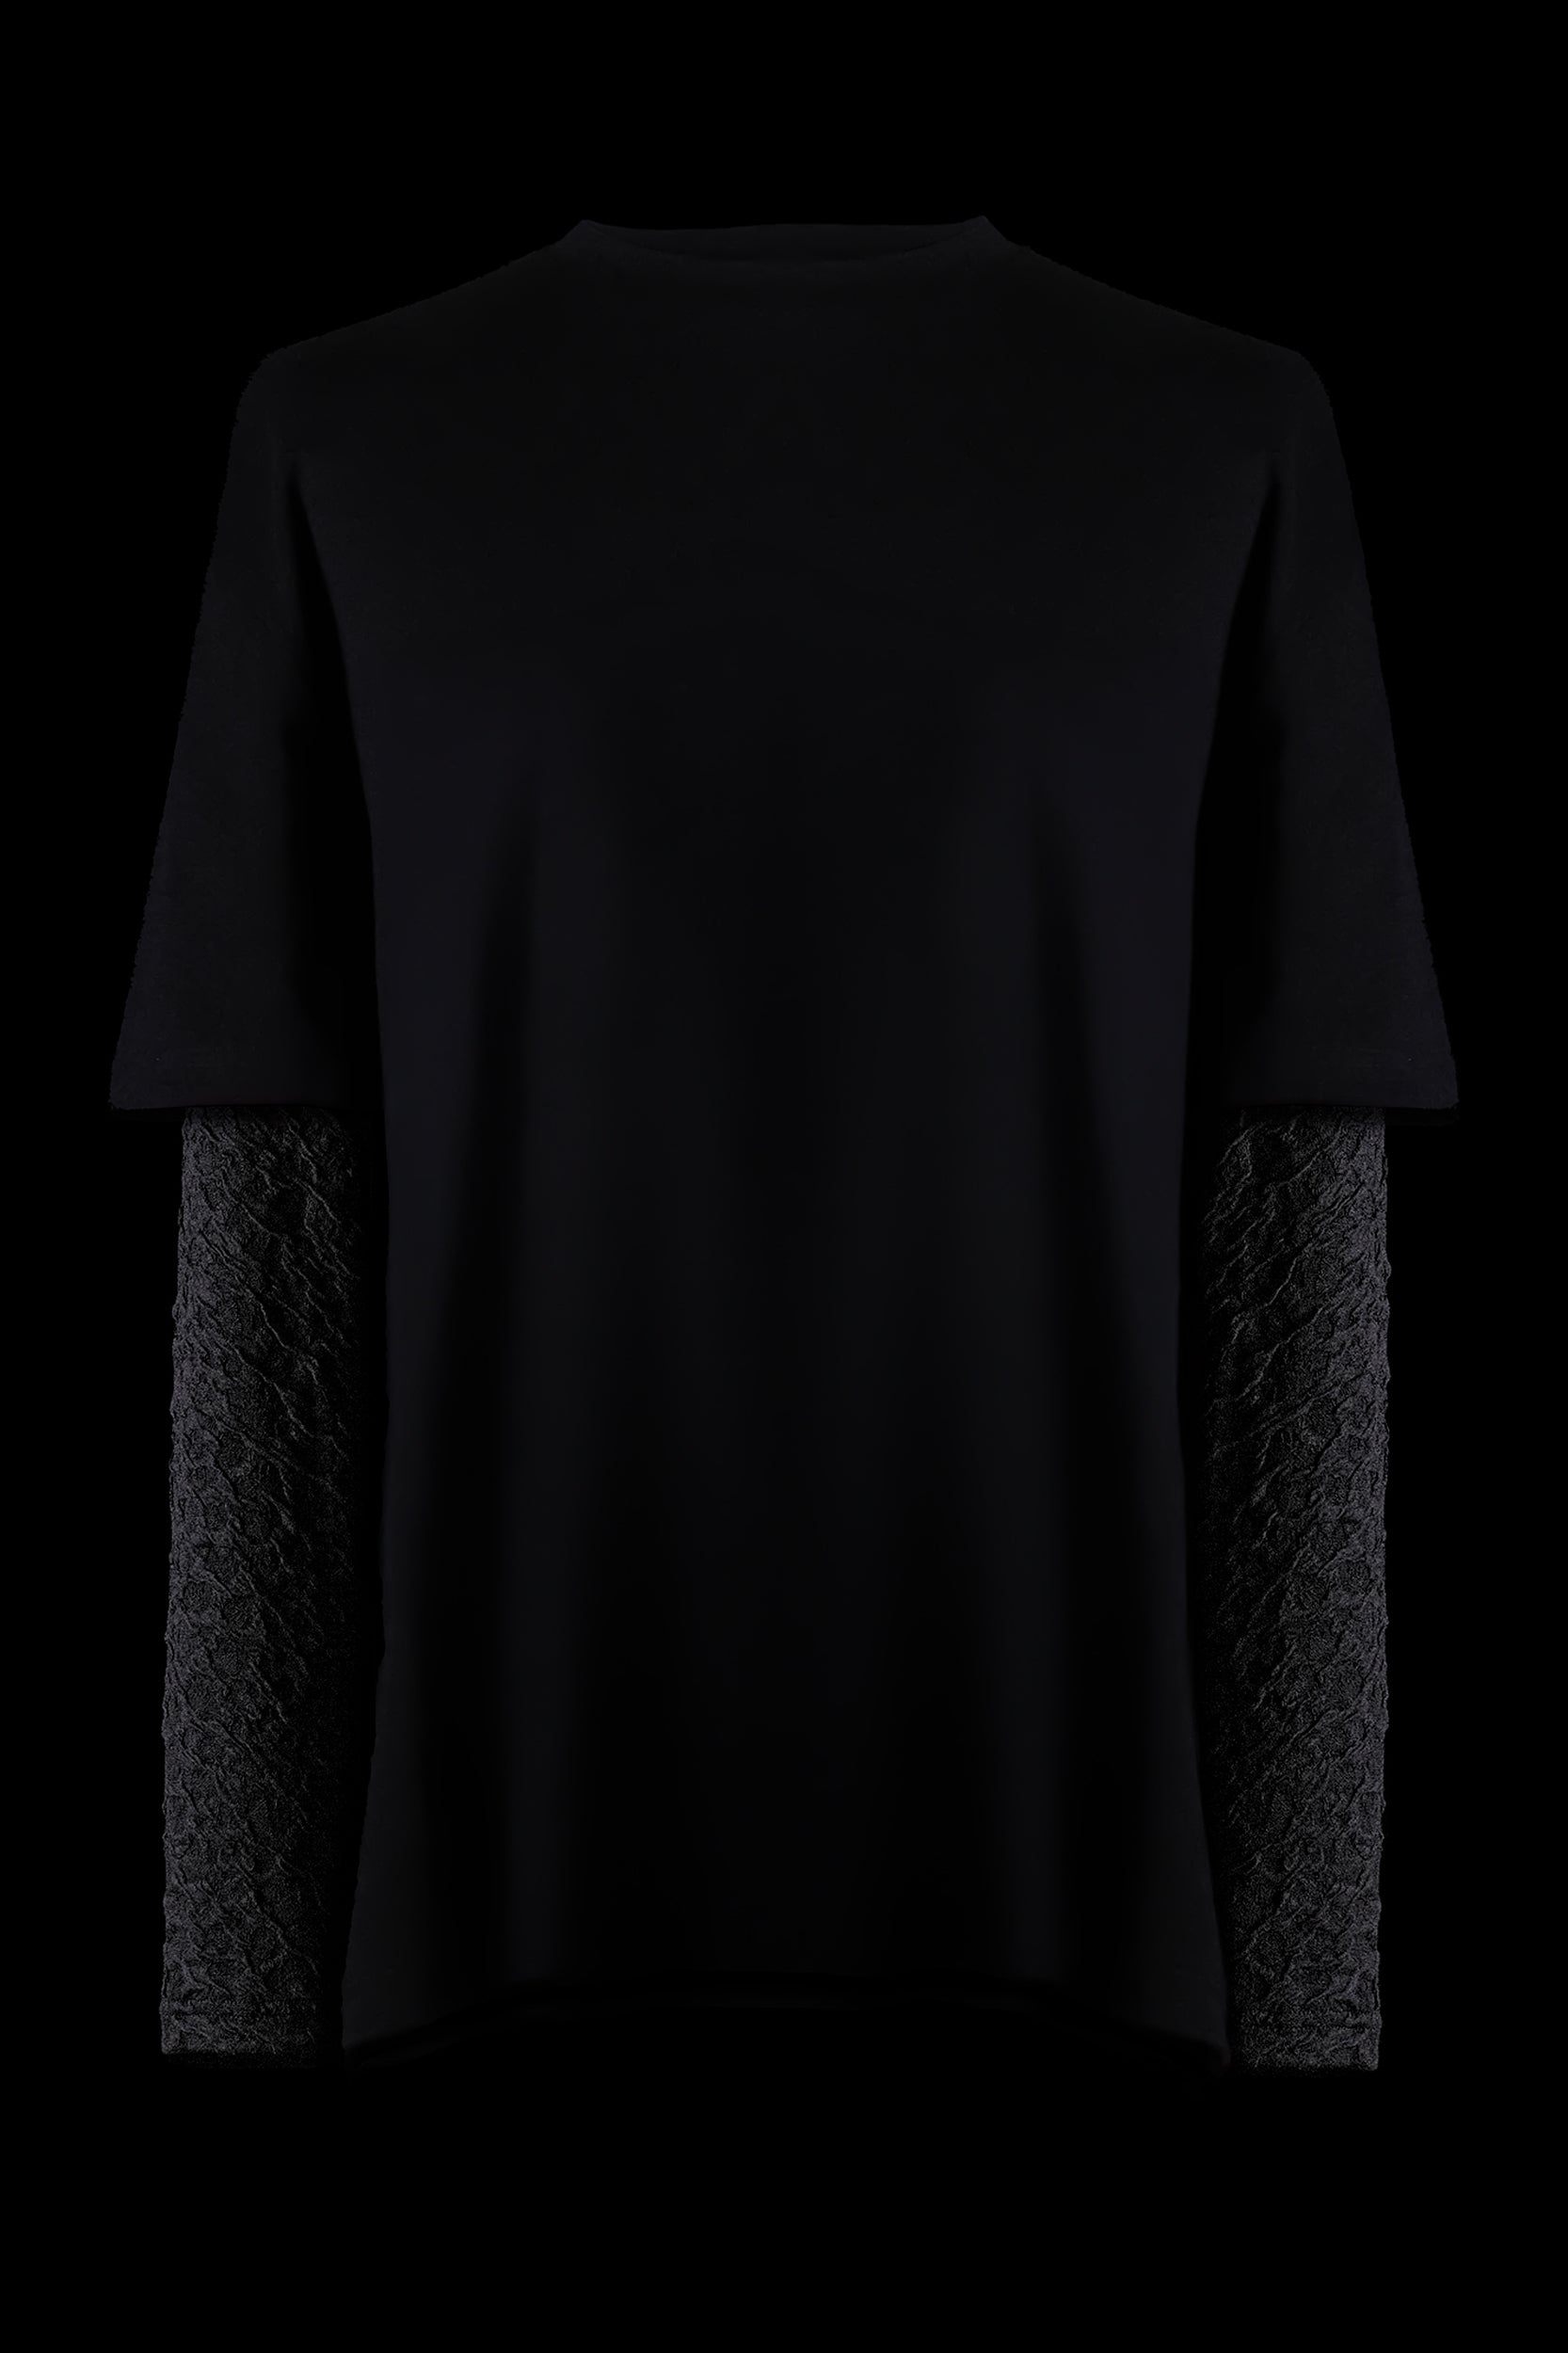 The Layered T-Shirt With Jacquard Knit Black Leopard Fitted Long Sleeves